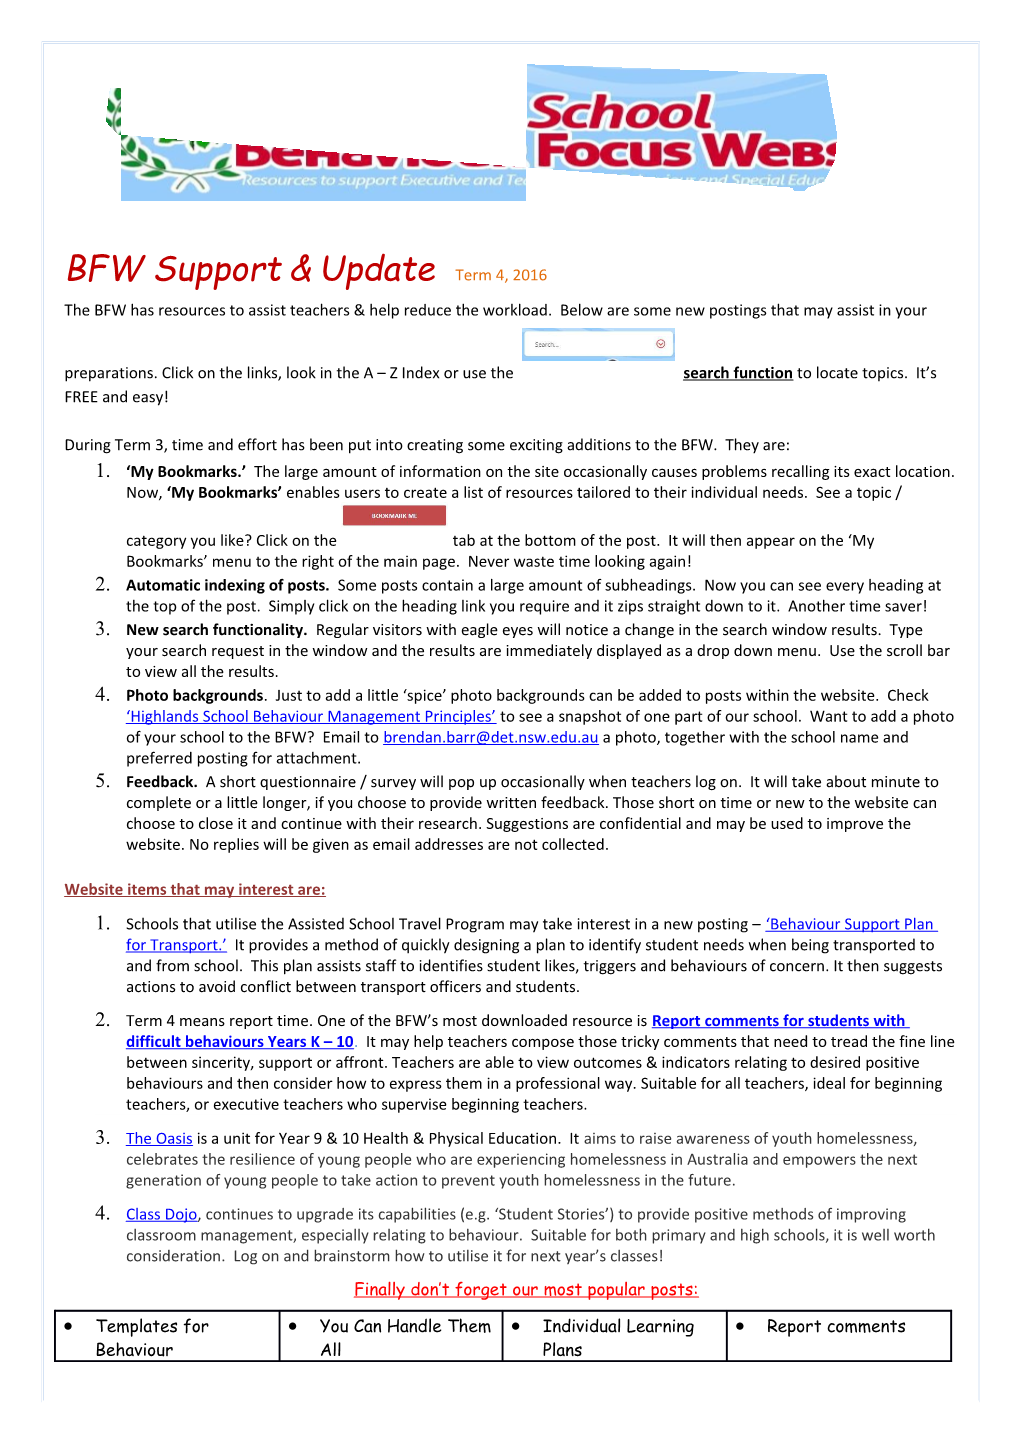 BFW Supportupdate Term 4, 2016